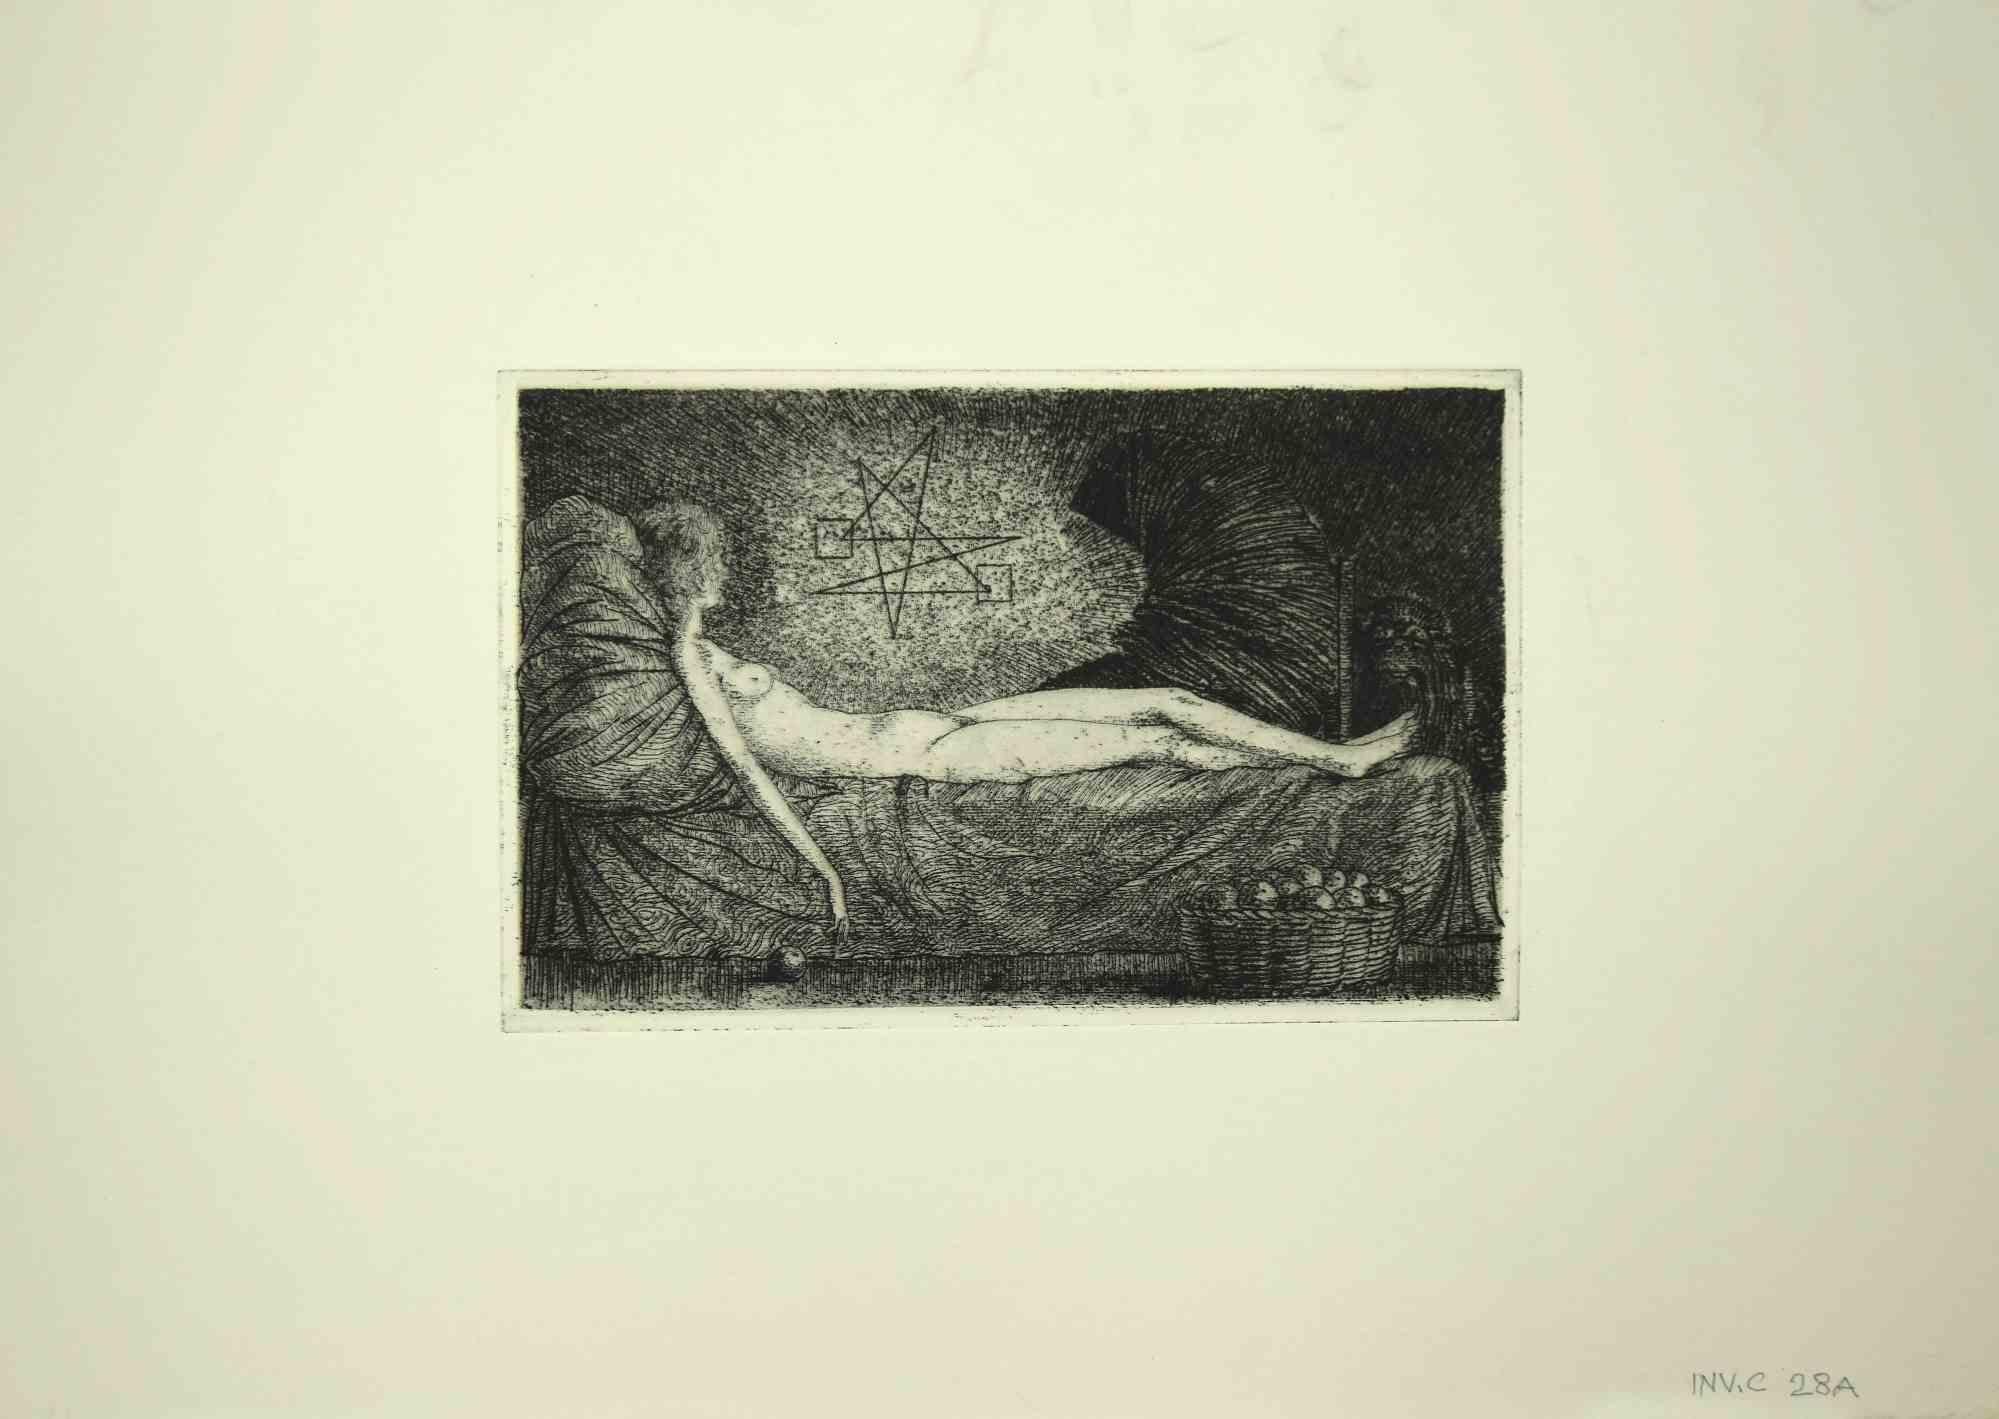 Reclined Nude is an original etching on paper realized by Leo Guida in the 1970s.

Good condition.

Leo Guida  (1992 - 2017). Sensitive to current issues, artistic movements and historical techniques, Leo Guida has been able to weave with many